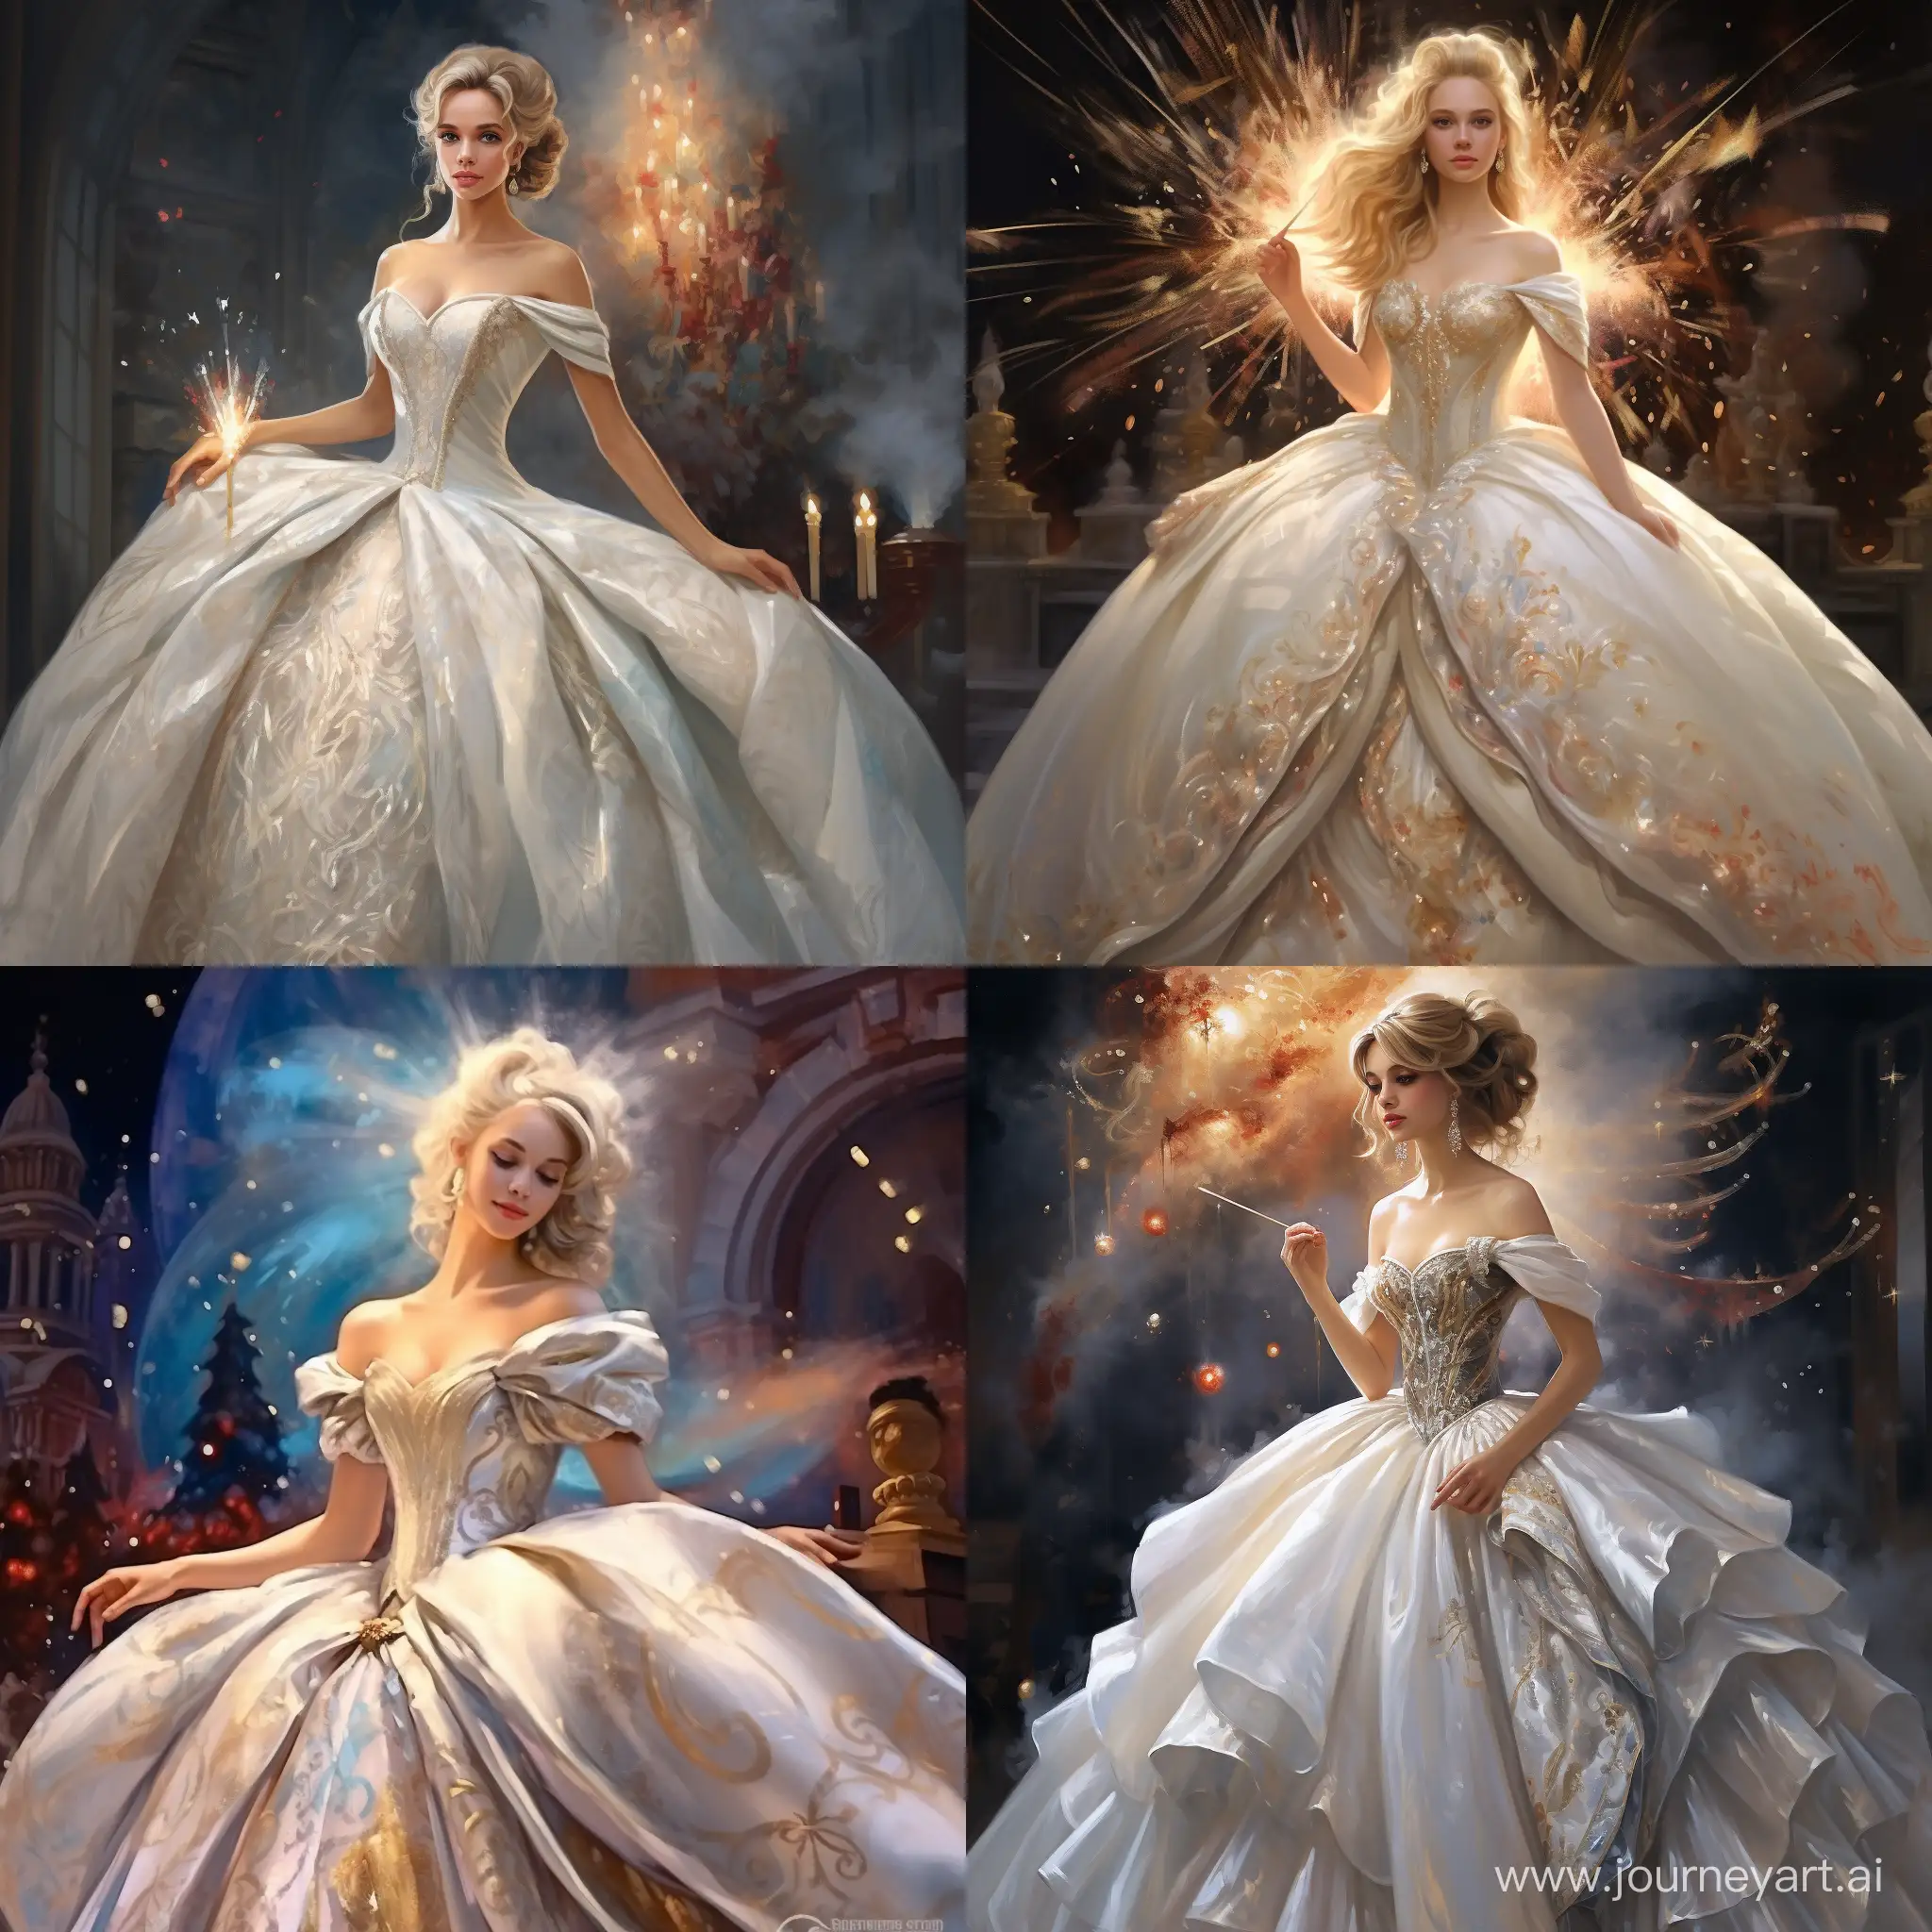 Elegant-White-Russian-Woman-in-RococoStyle-Ball-Gown-Amidst-New-Years-Fireworks